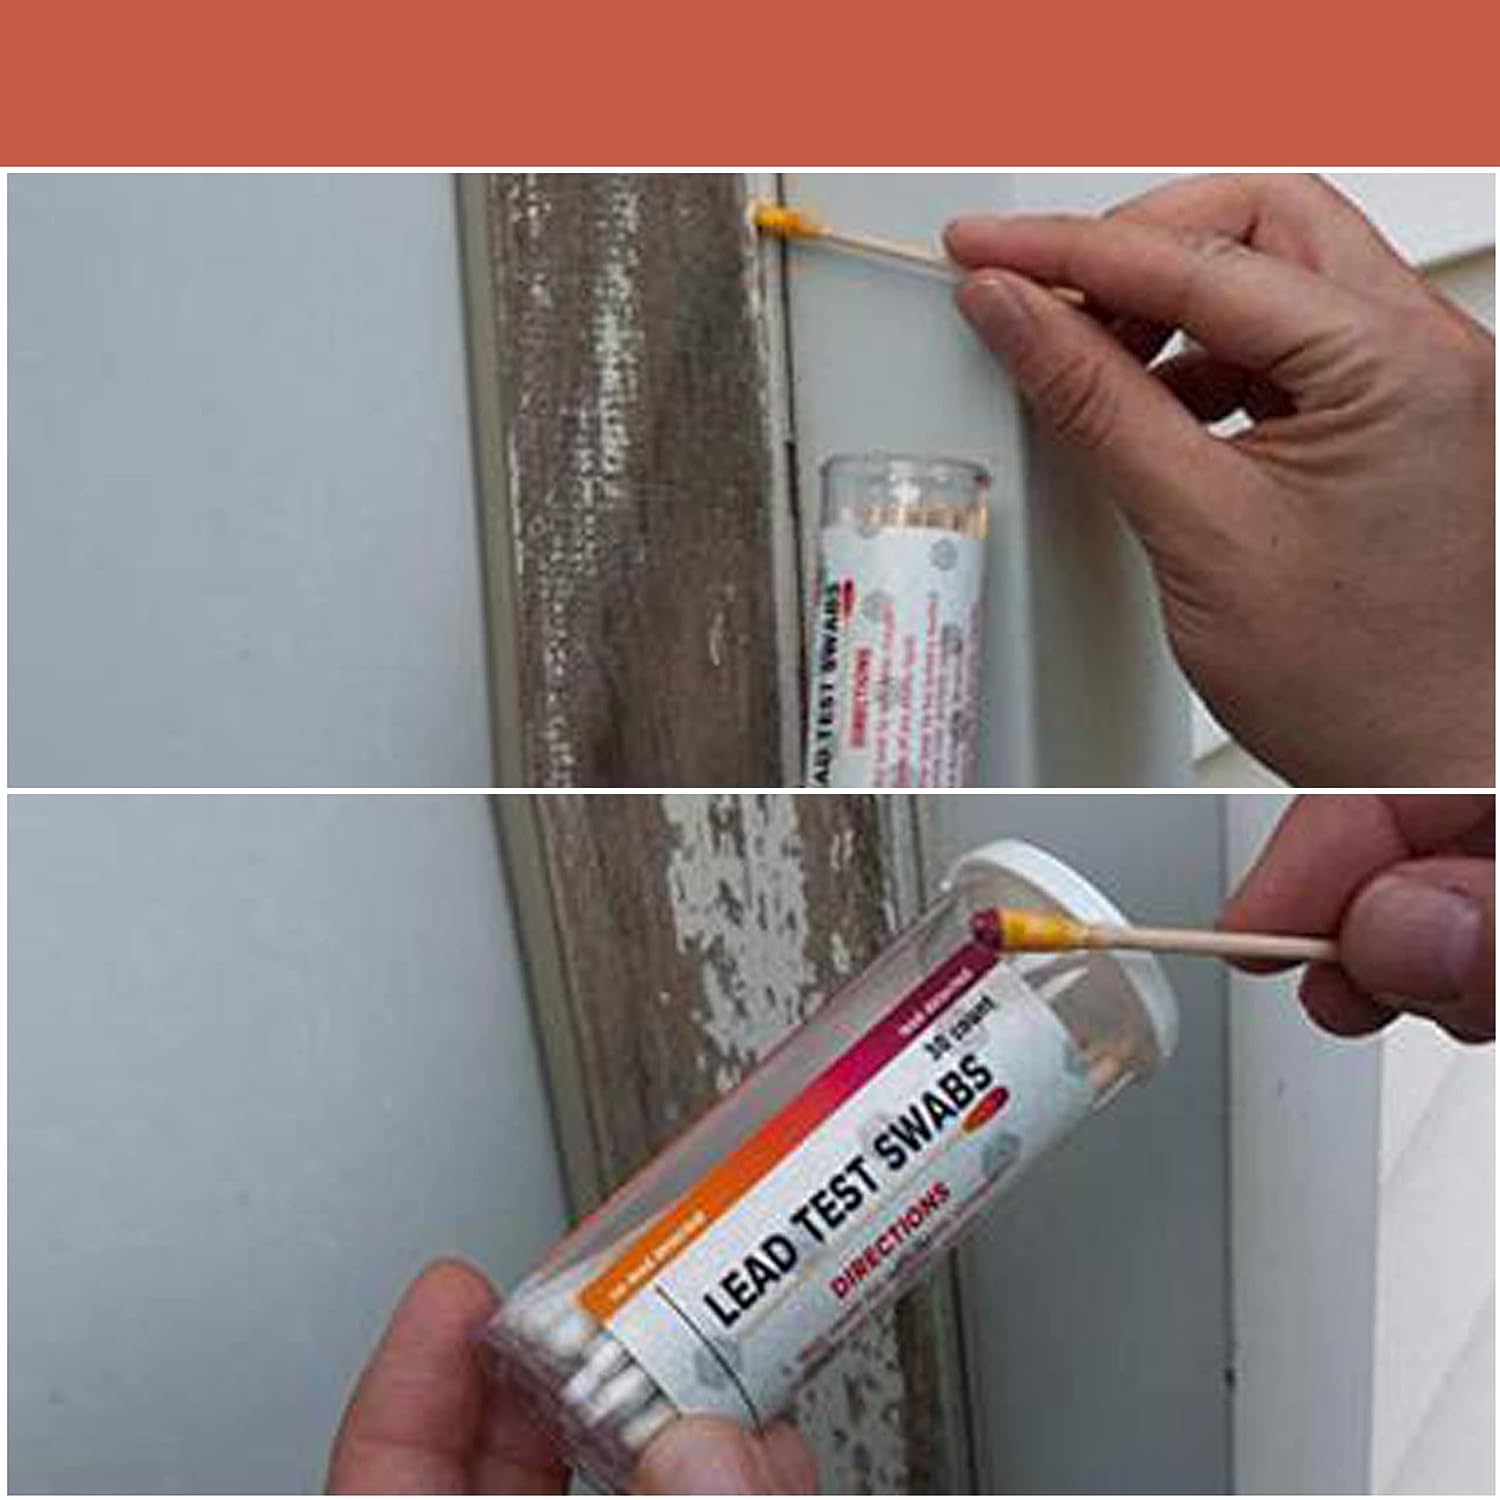 Rapid Detection Consumer Lead Safety Swabs Instant Lead Test Swab Kit (80X4=320 Pcs Rapid Home Testing Swabs) 30-Second Results. Dip in White Vinegar. Home Use for All Surfaces - Painted, Dishes, Toys, Jewelry, Metal, Ceramics, Wood (LS320)